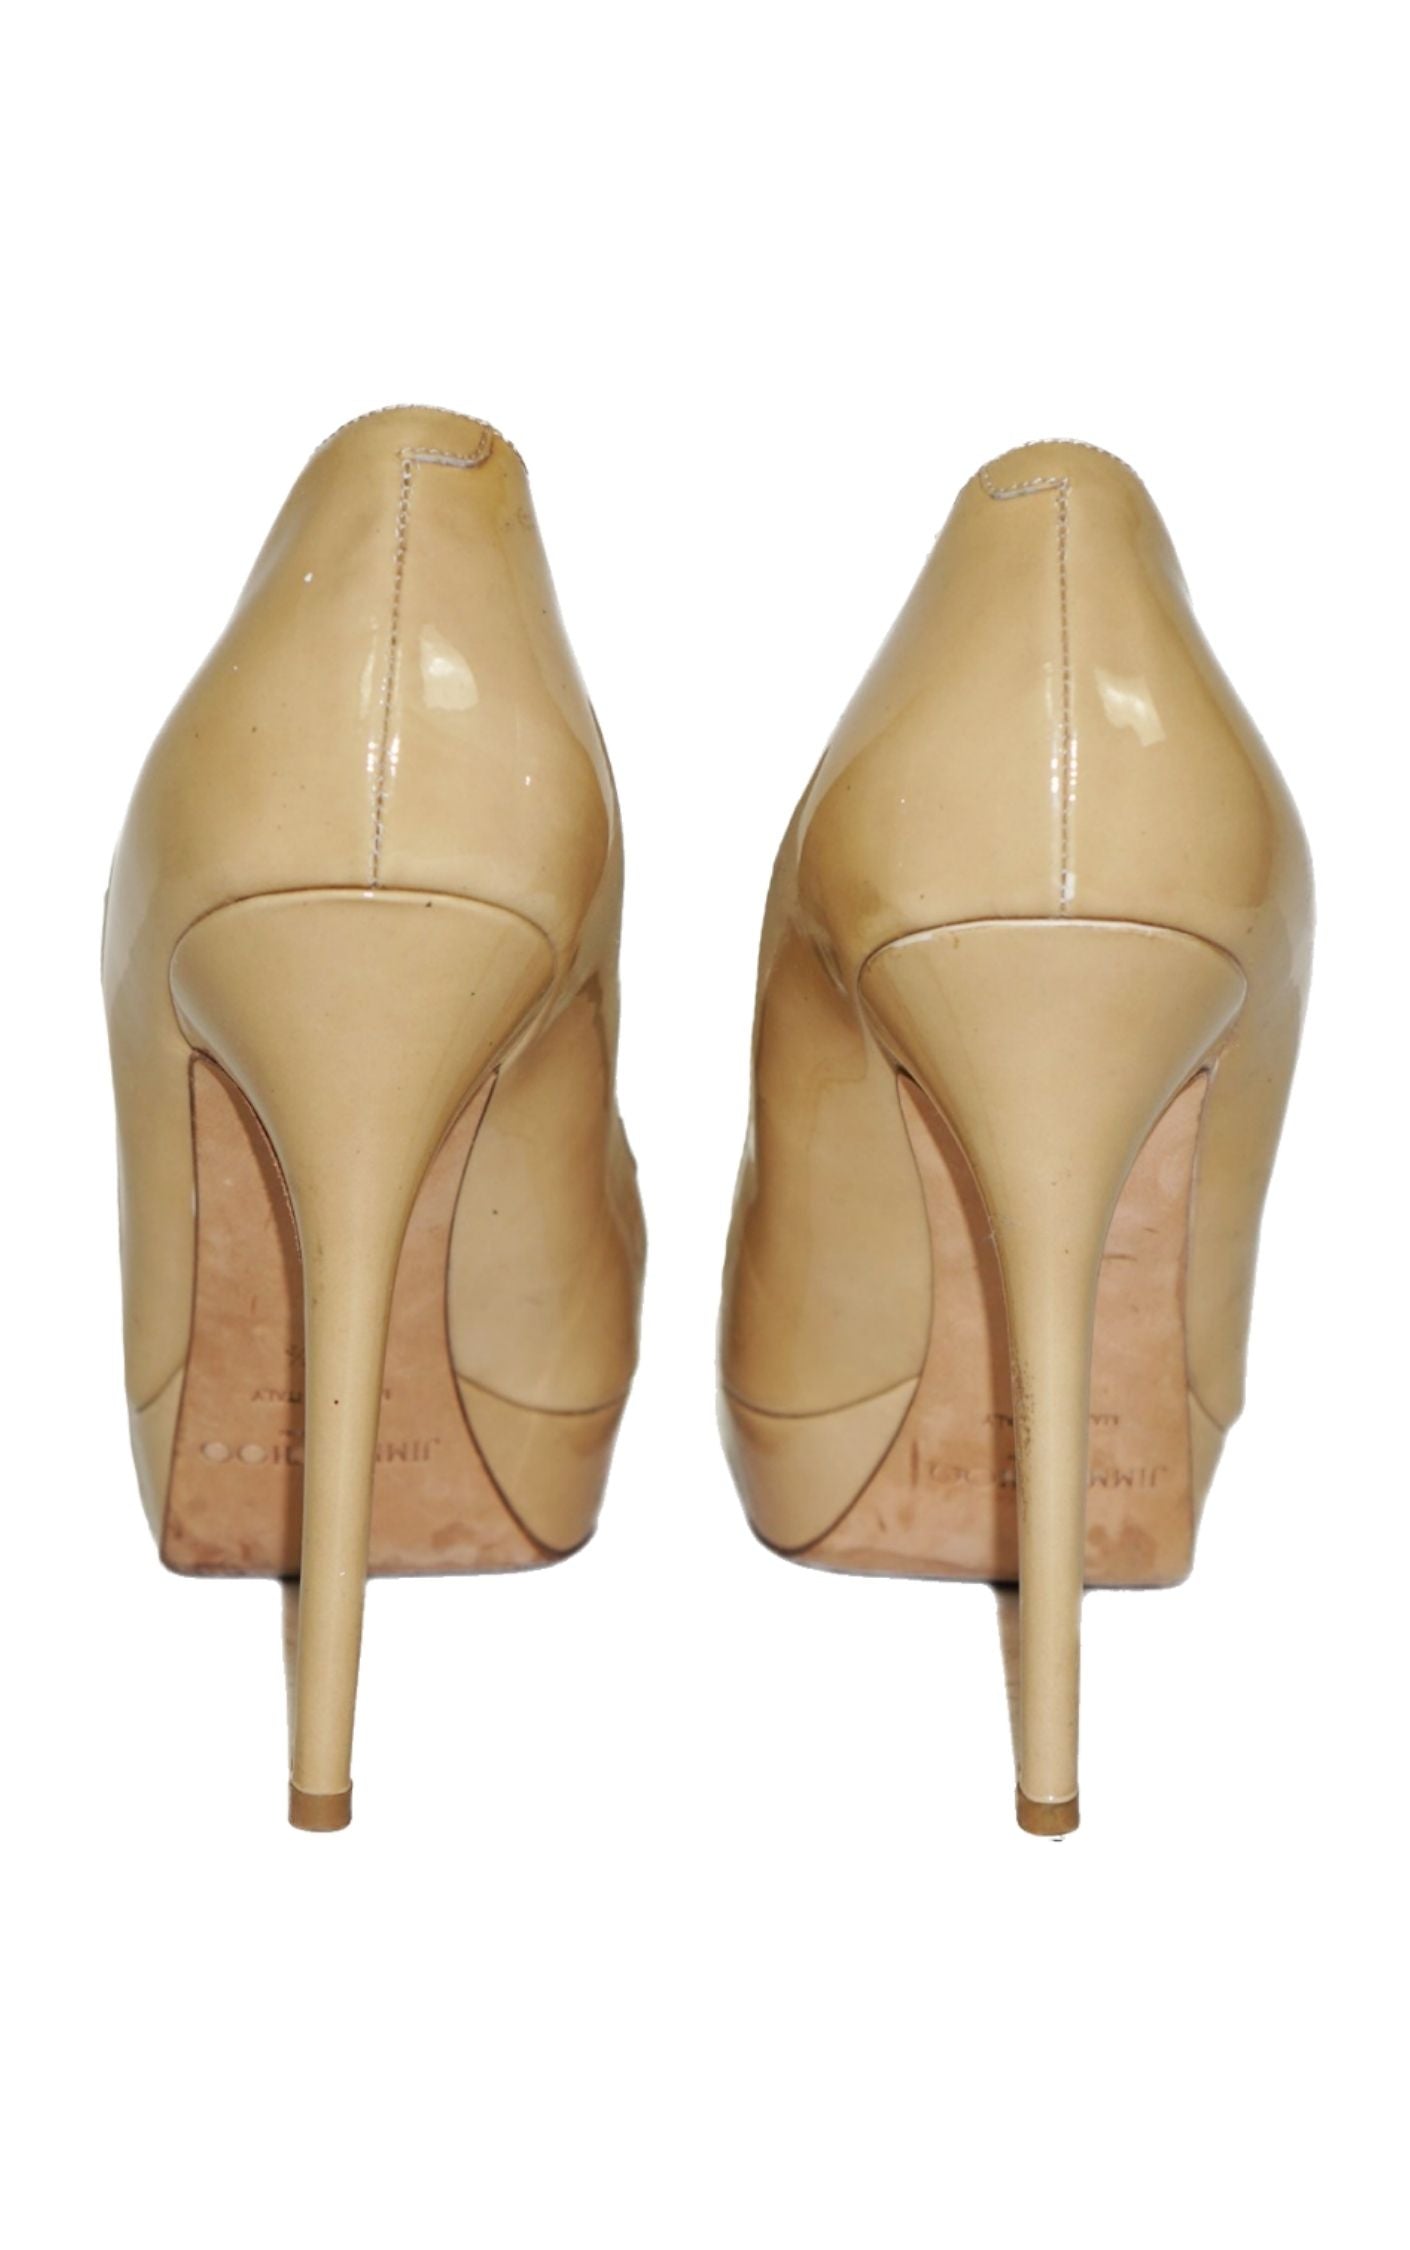 JIMMY CHOO Nude Patent Leather Heeled Pumps RESELLUM